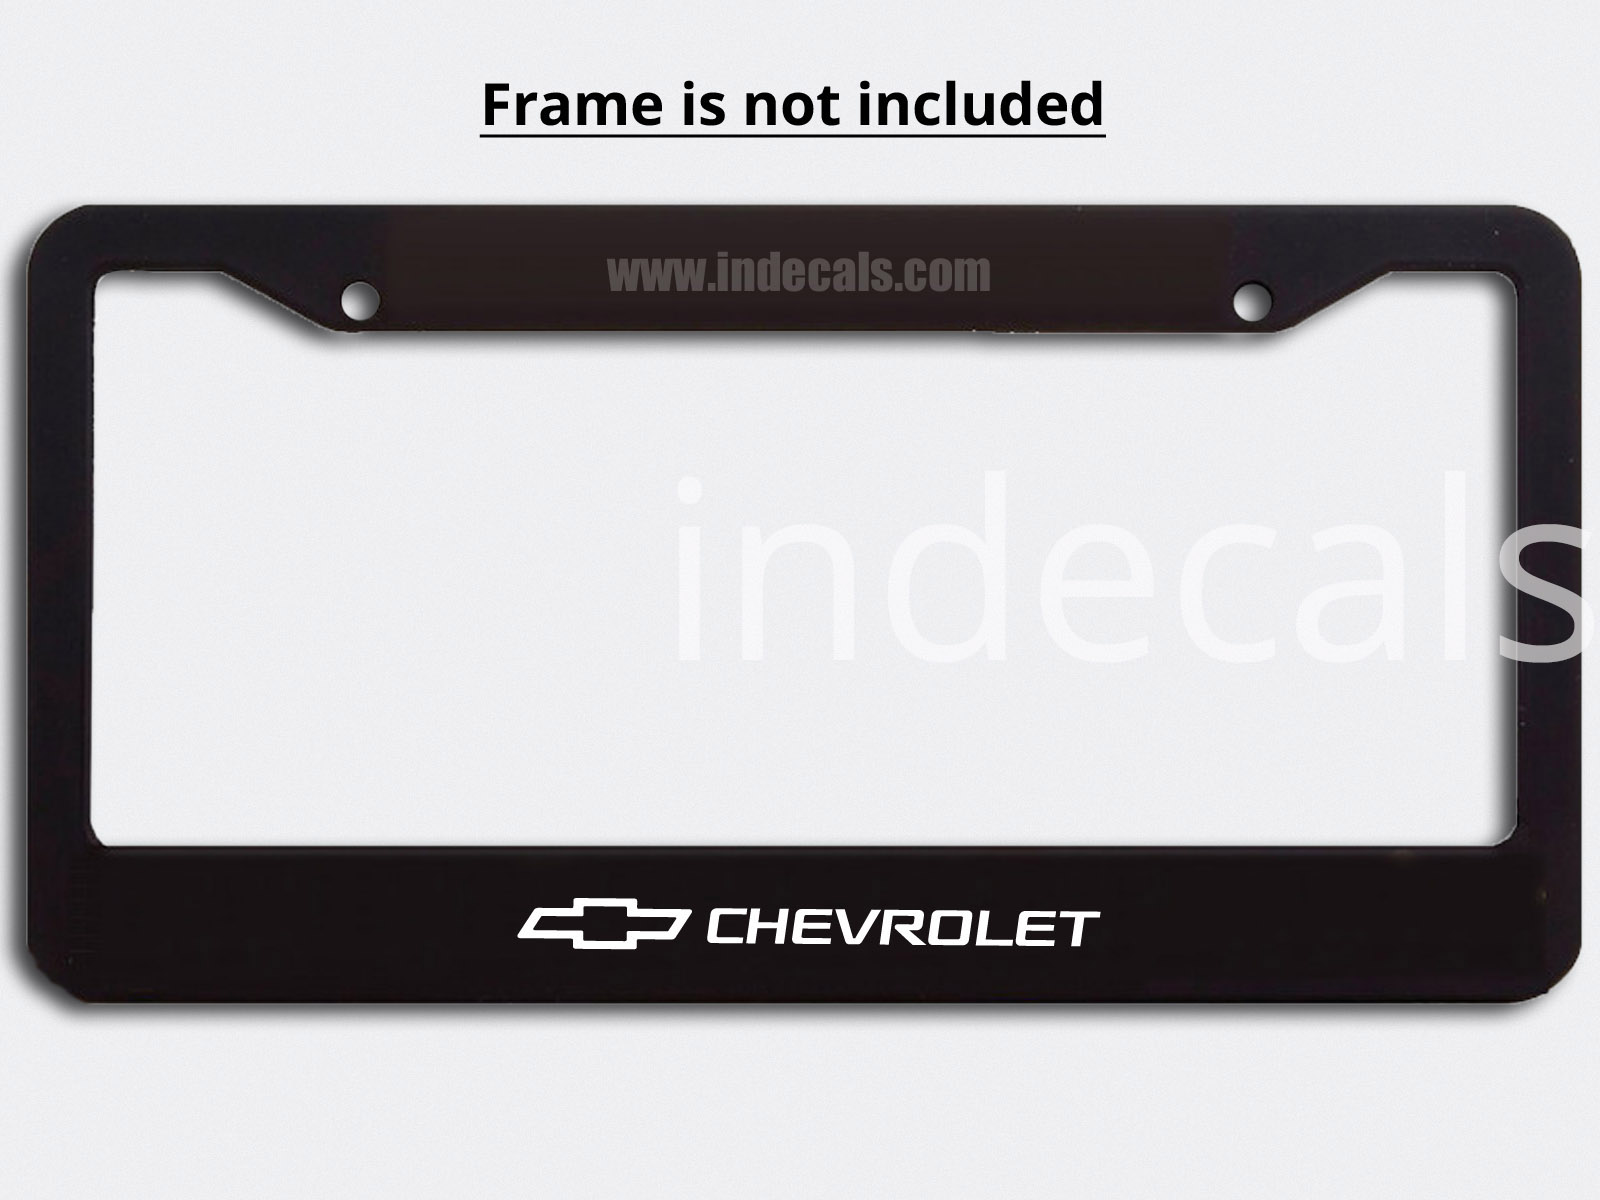 3 x Chevrolet Stickers for Plate Frame - White